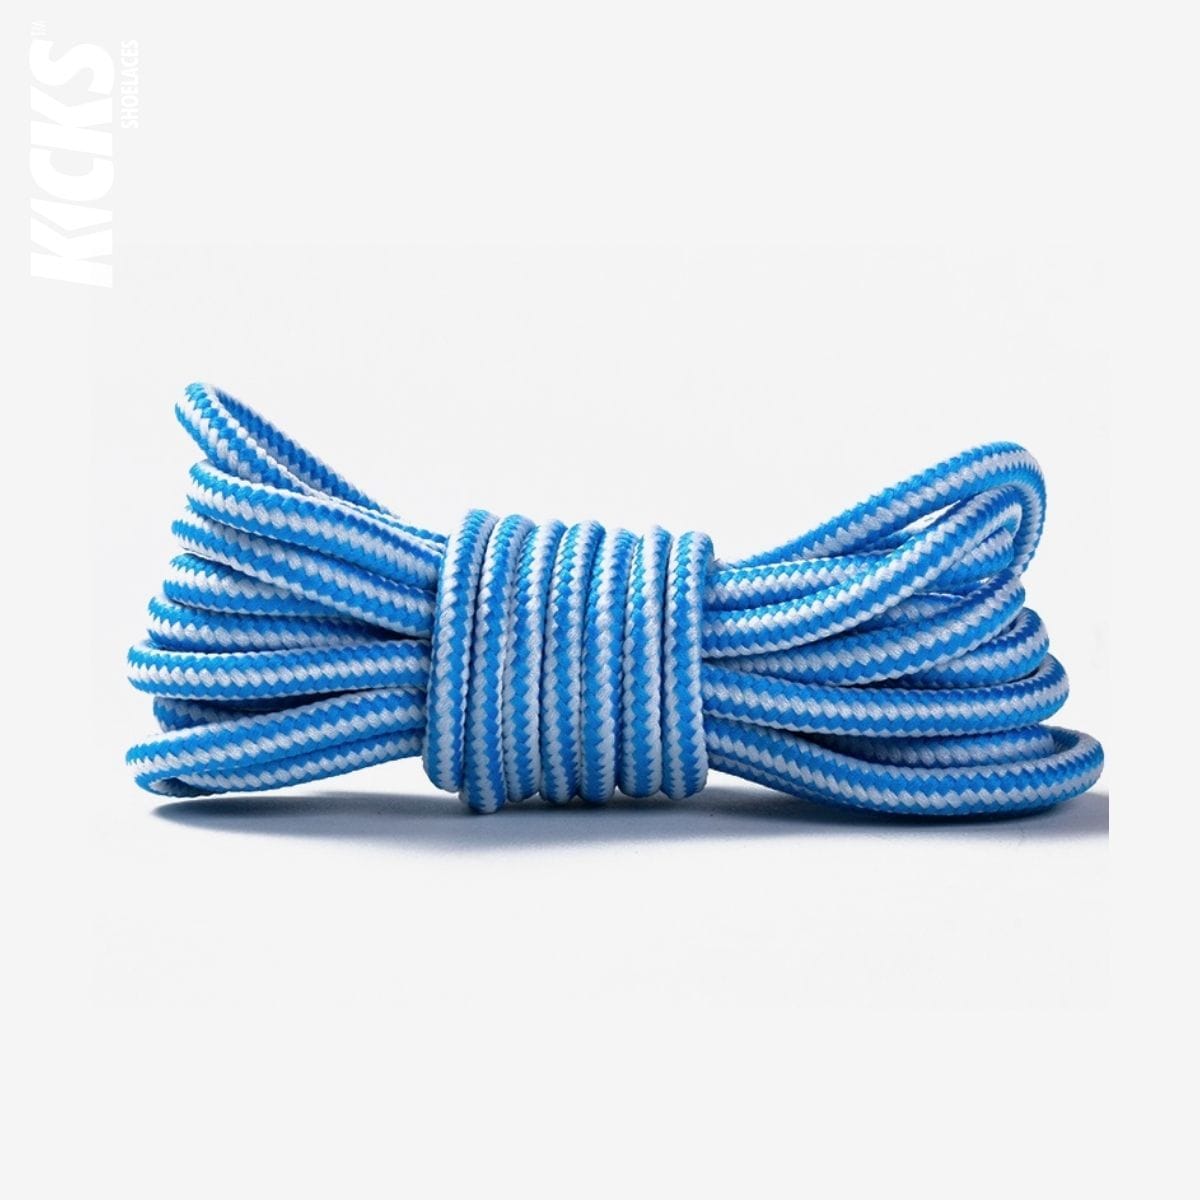 striped-two-color-shoelaces-for-casual-shoes-in-blue-and-white